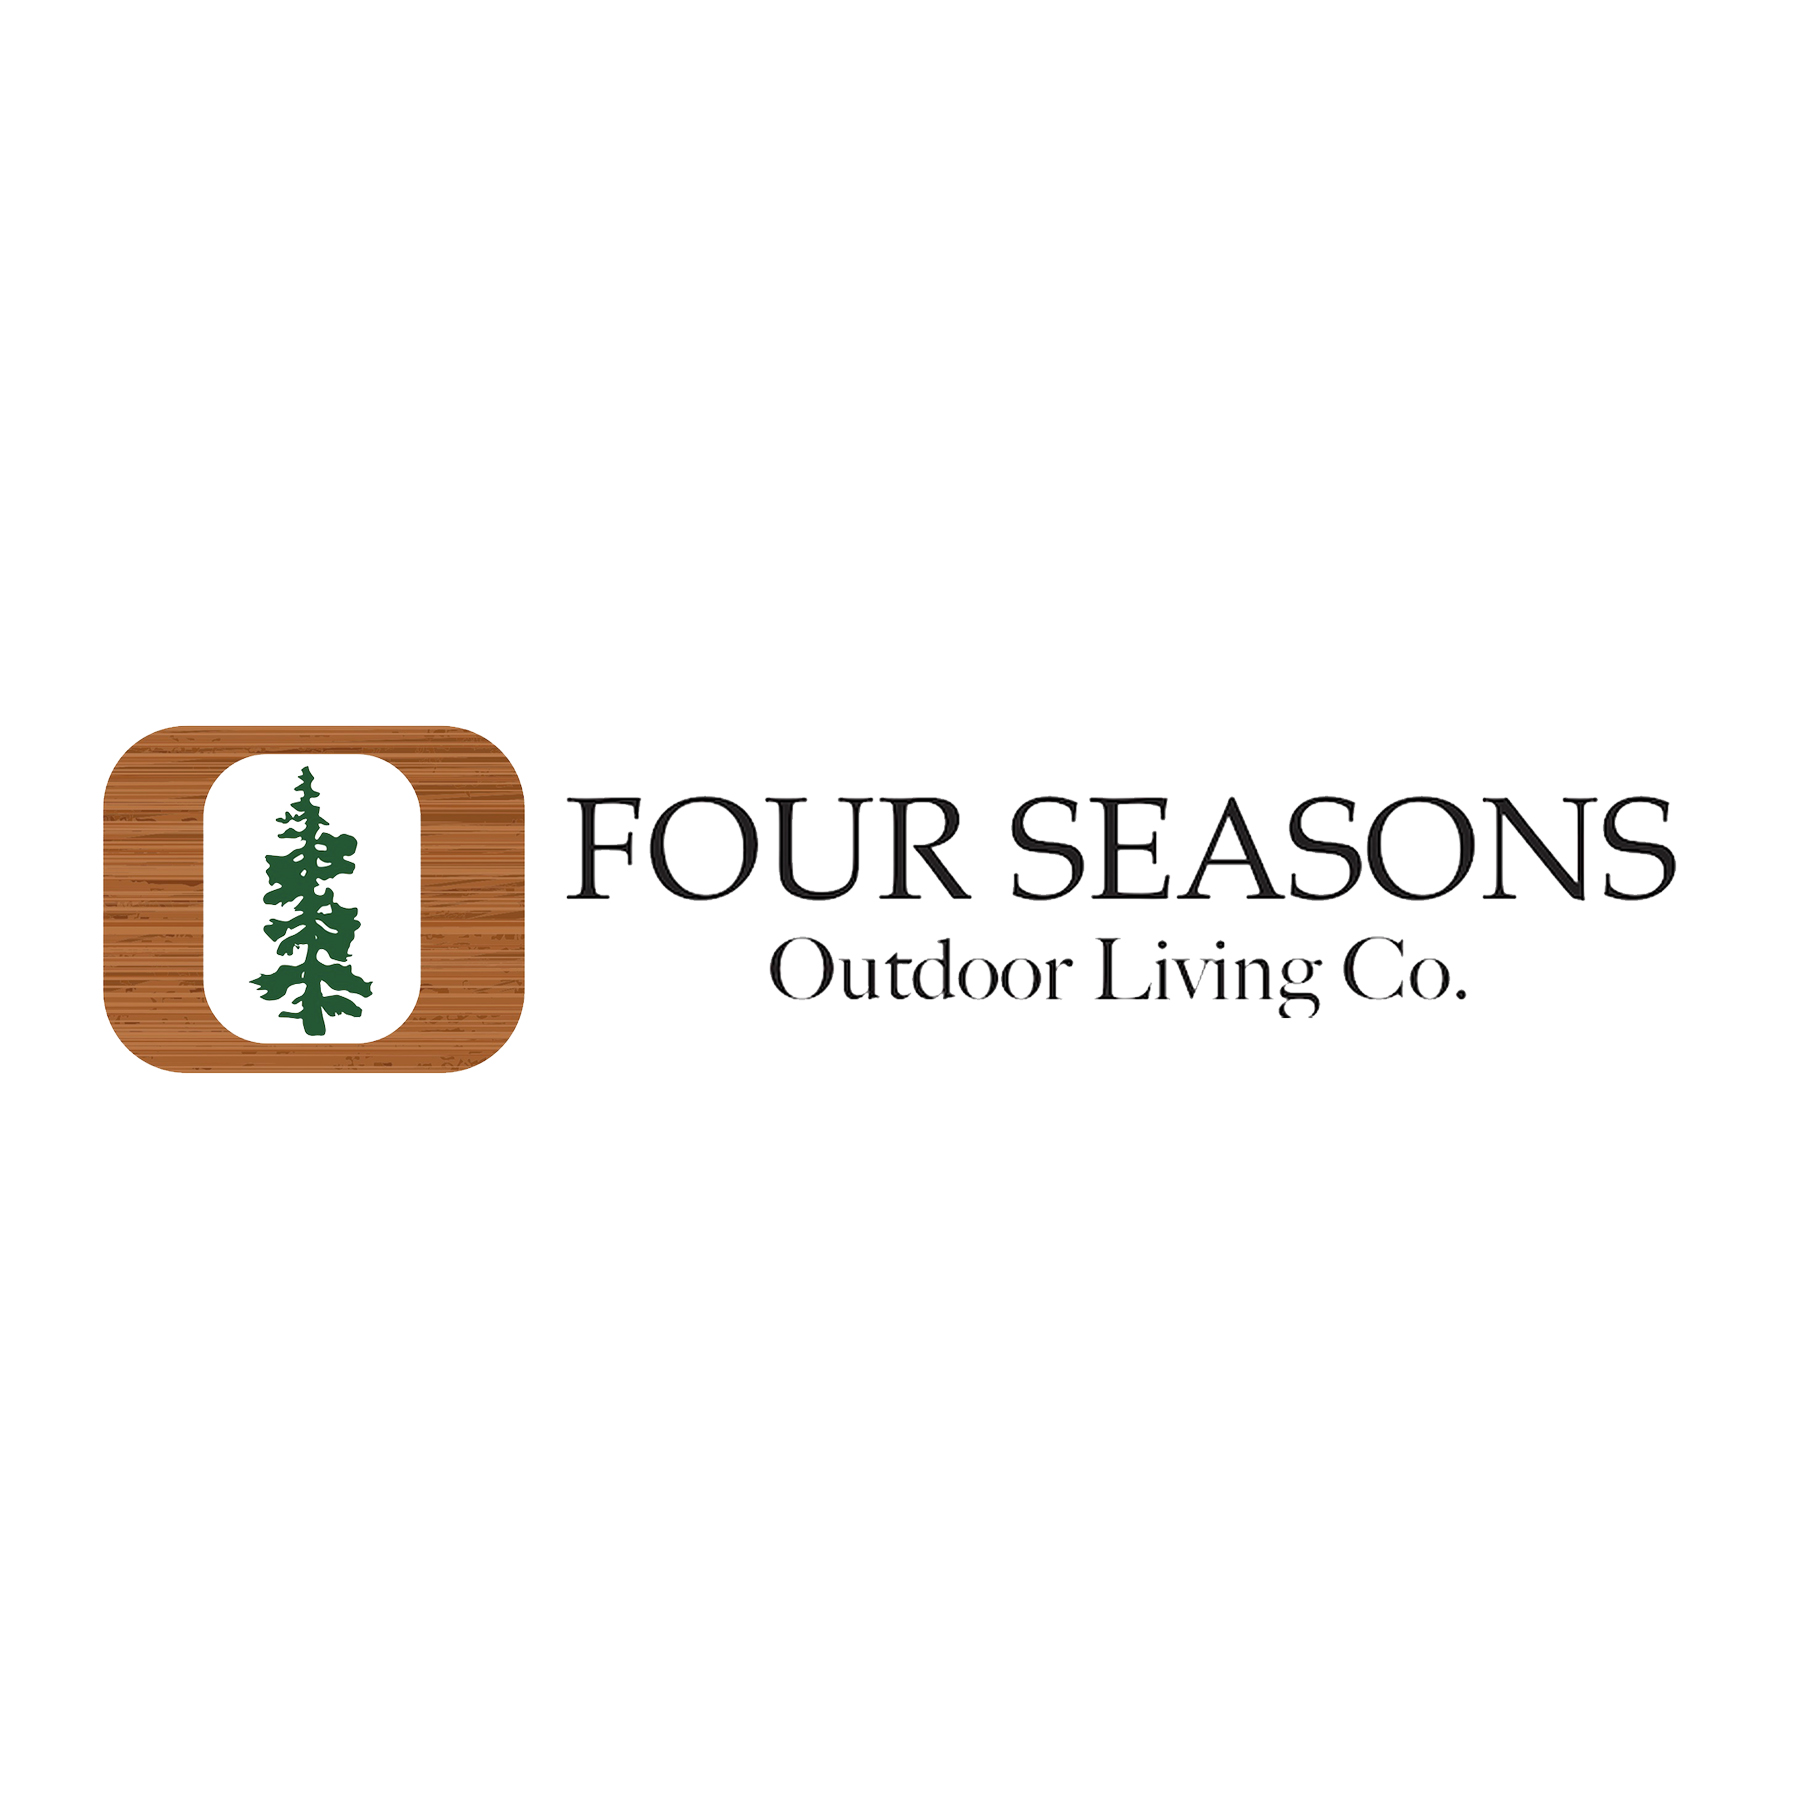 Four Seasons Outdoor Living: Landscape and Paver Patios's Logo